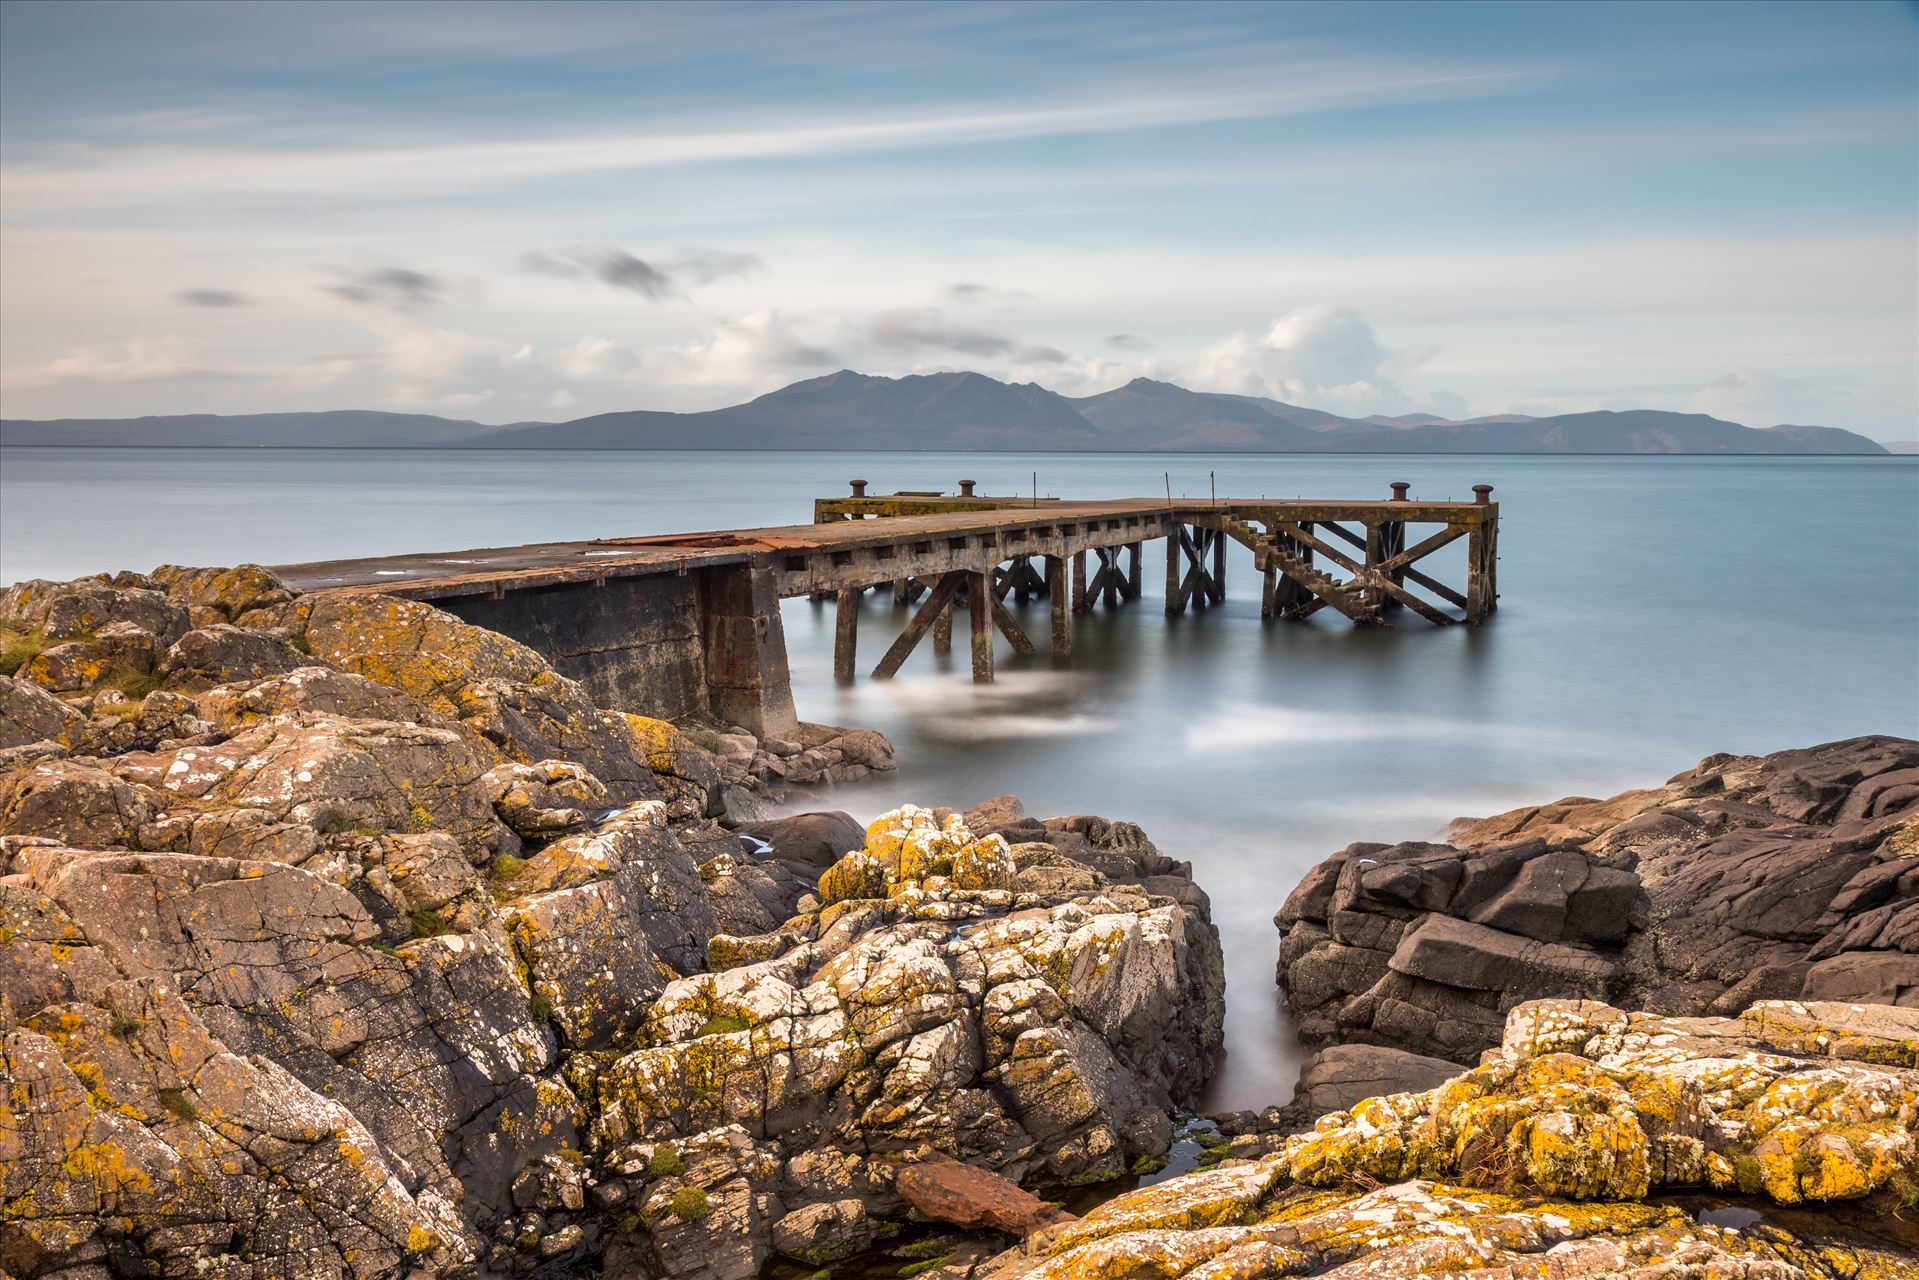 Portencross Jetty looking out to the Isle of Arran Portencross Jetty looking out to Arran on the South West Coast of Scotland.  by Tony Keogh Photography